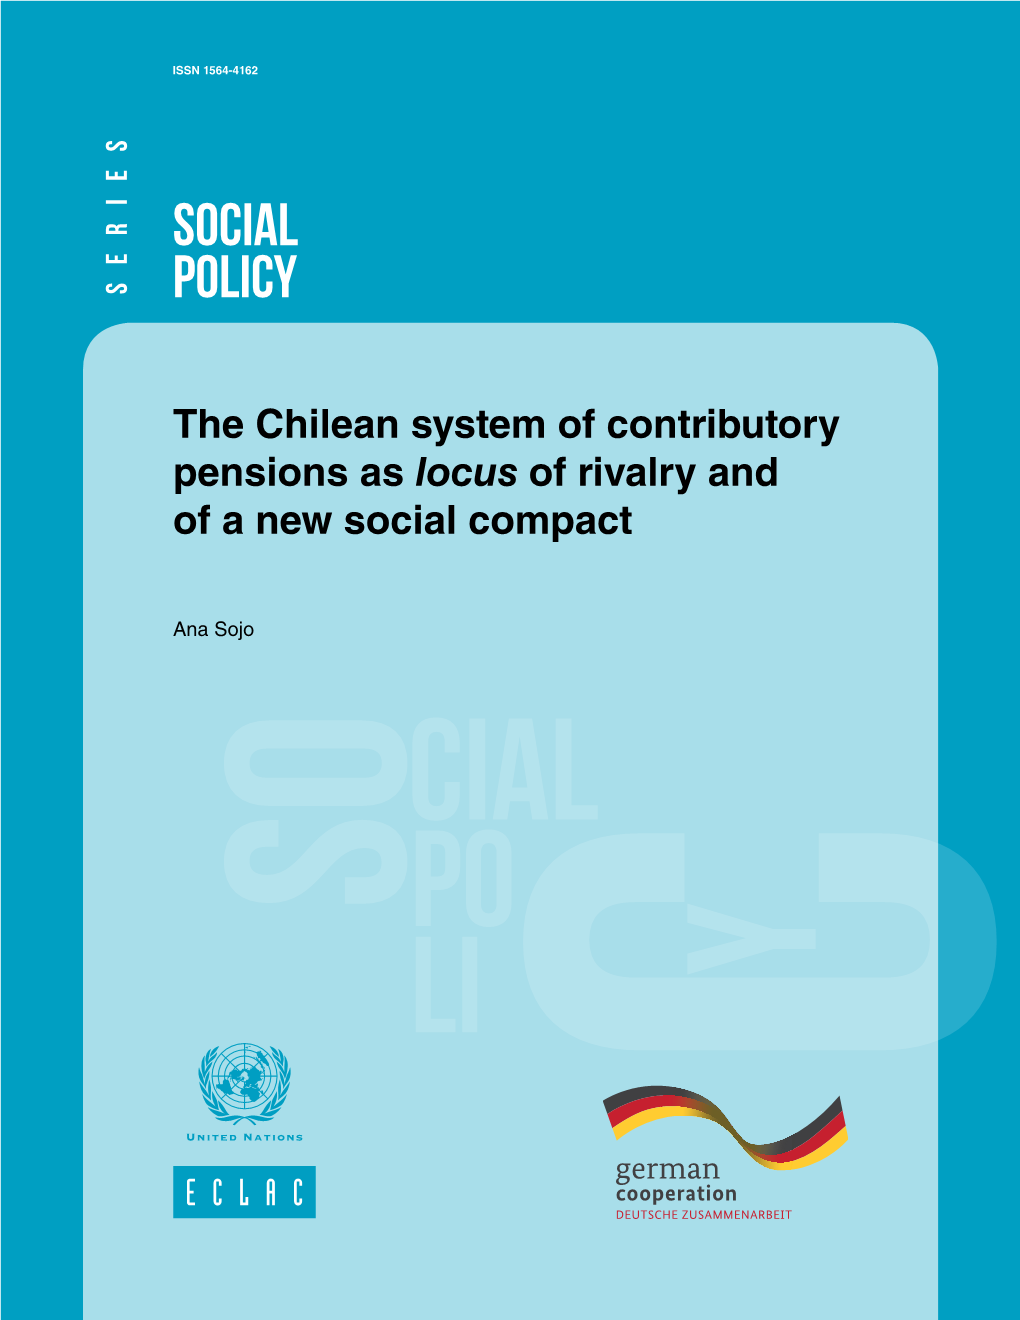 The Chilean System of Contributory Pensions As Locus of Rivalry and of a New Social Compact